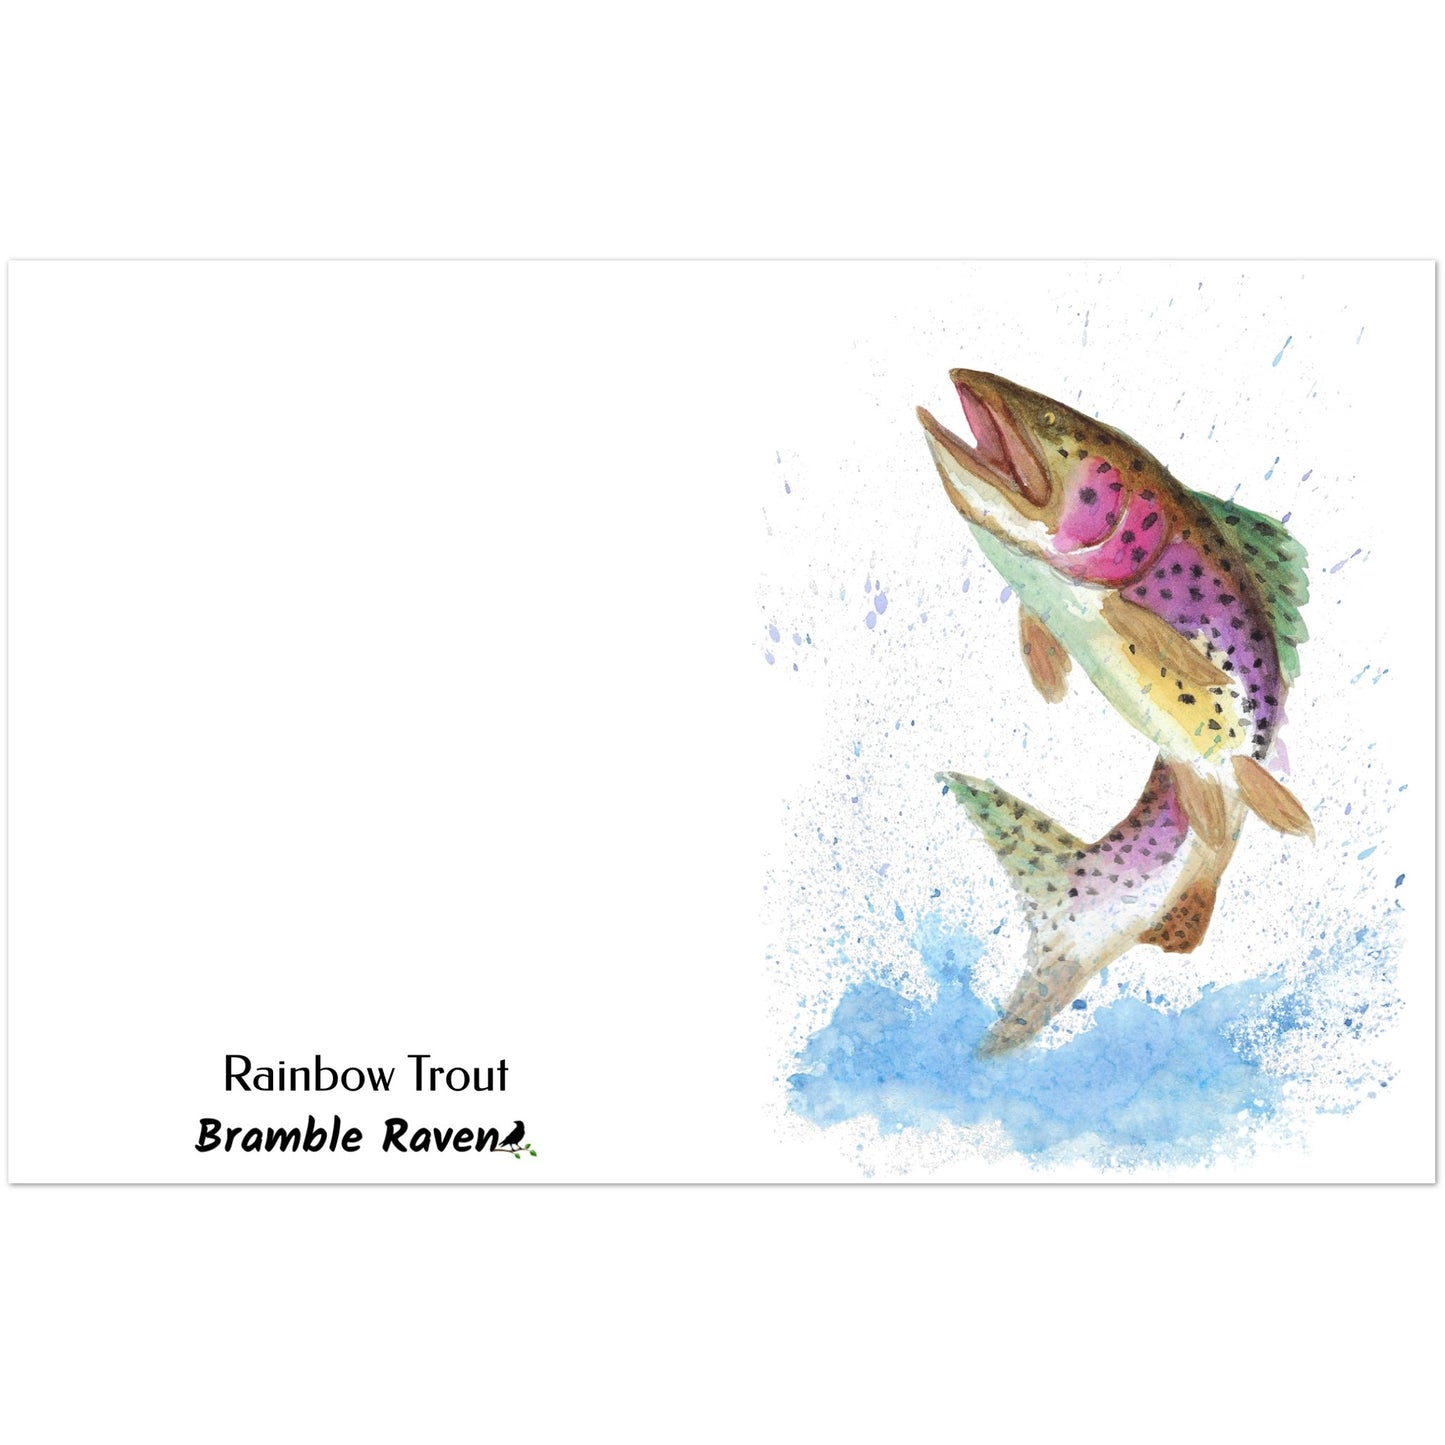 Ten greeting cards with print of watercolor rainbow trout on the front. Inside is blank. Comes with envelopes. Cards measure 4.25 by 5.5 inches. Made with 350 gsm 150lb coated paperboard with vibrant printing.